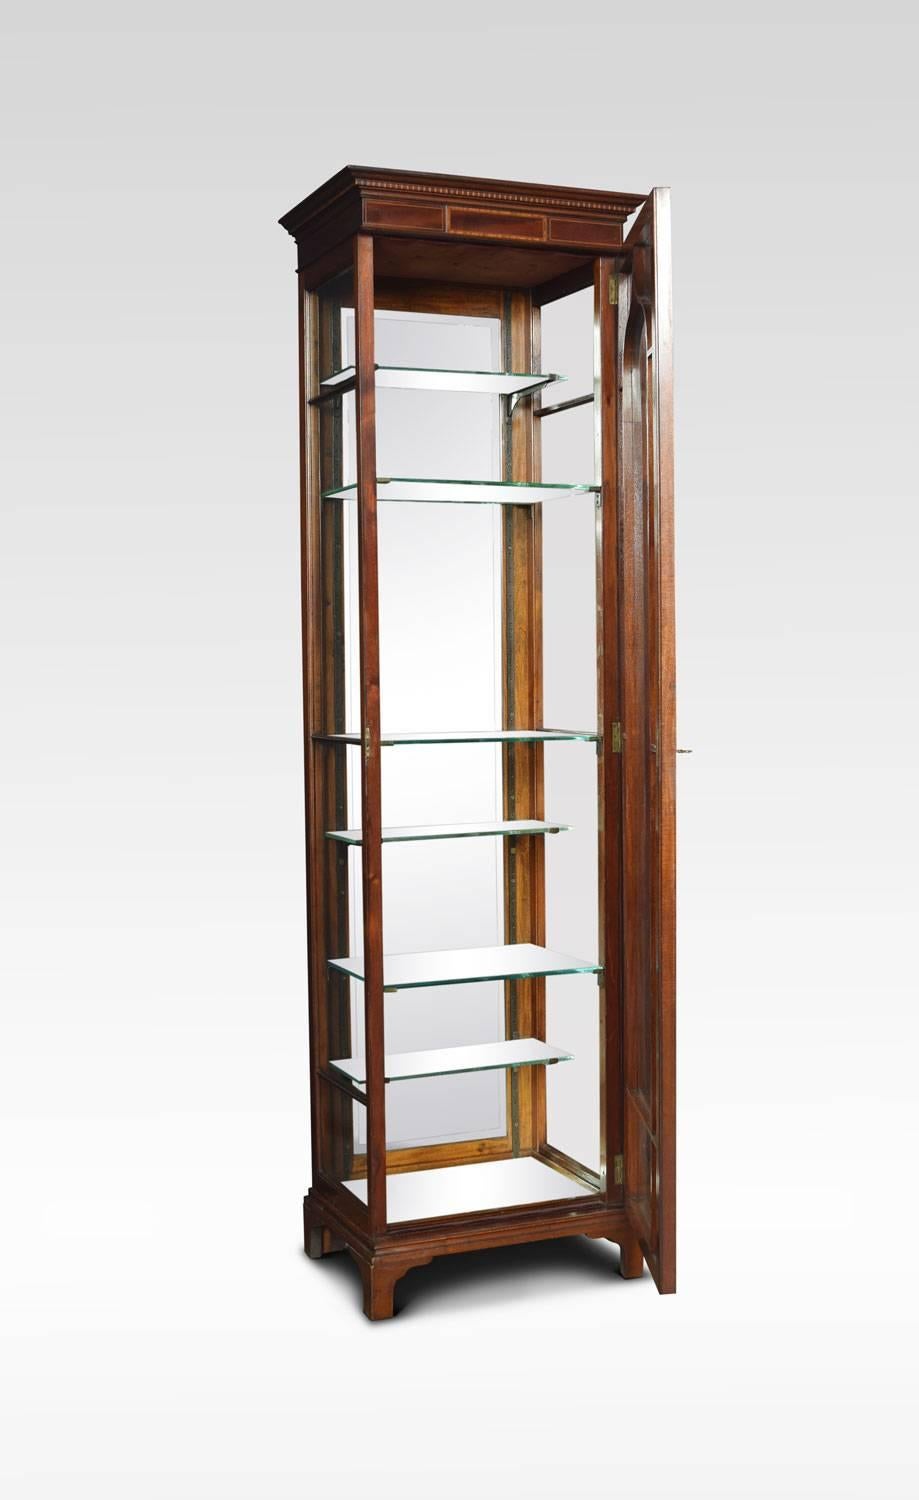 Edwardian mahogany shop display cabinet with an inlaid and cross banded cornice and frieze, above a single astragal glazed door. The interior with mirrored back and floor with three full depth glass shelves and three further shallower adjustable